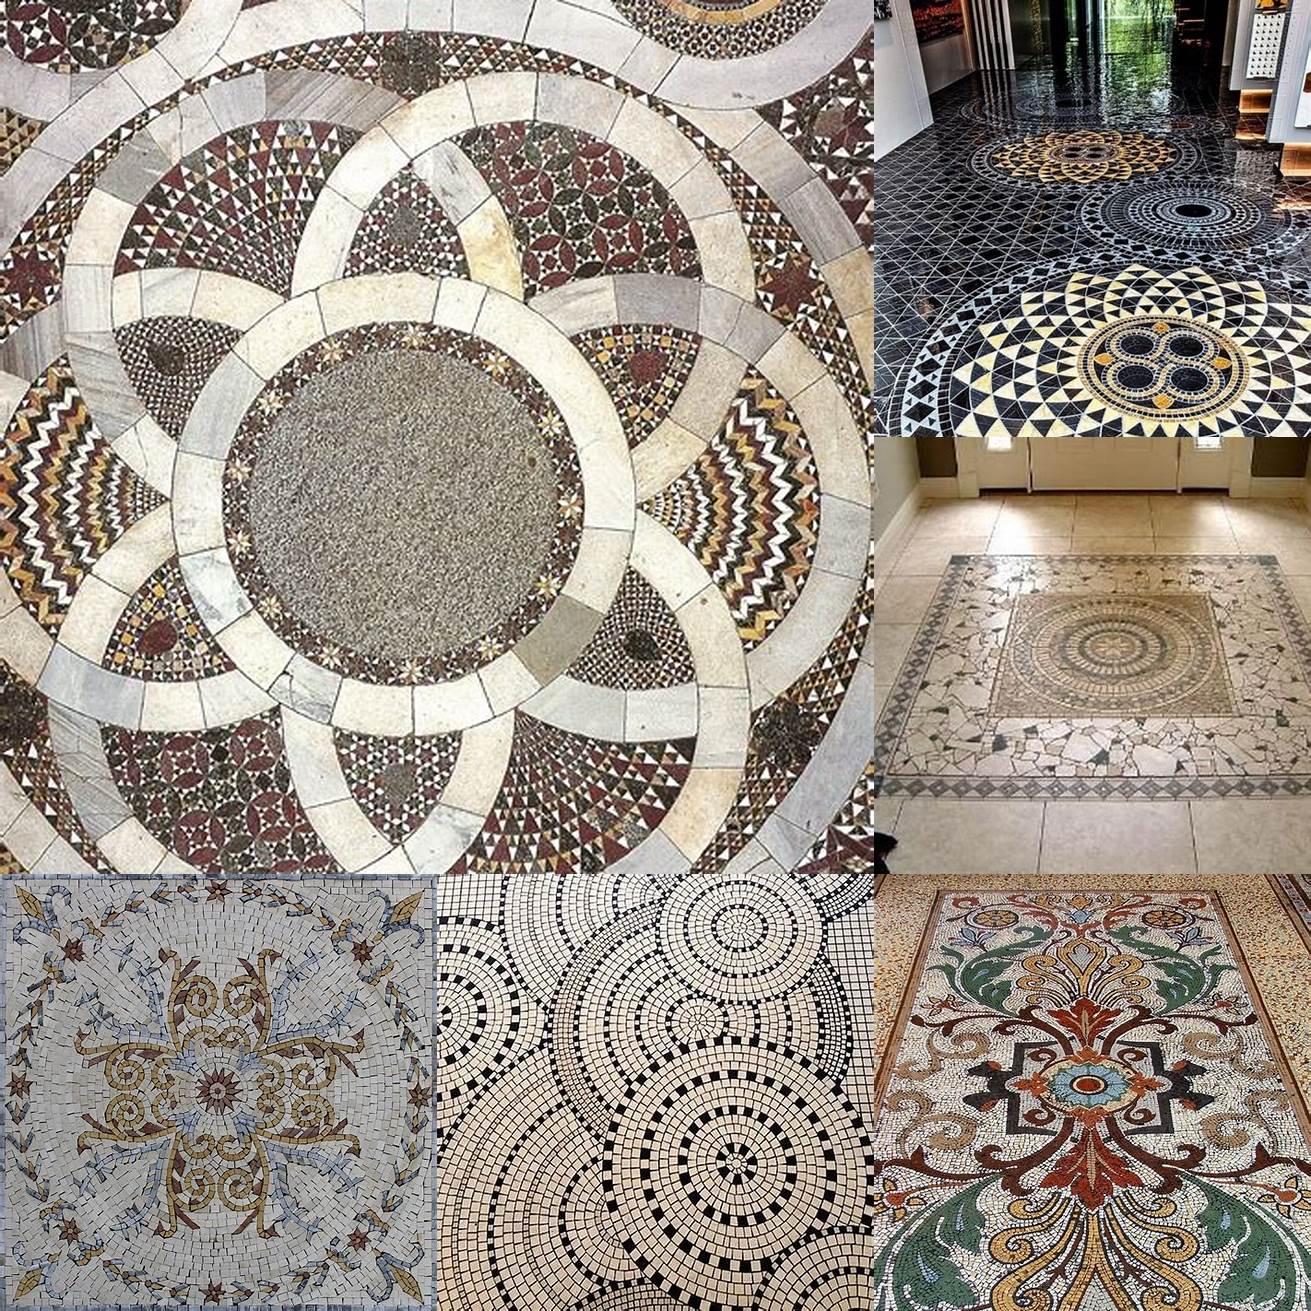 Mosaic floor tiles can be used to create intricate patterns and designs